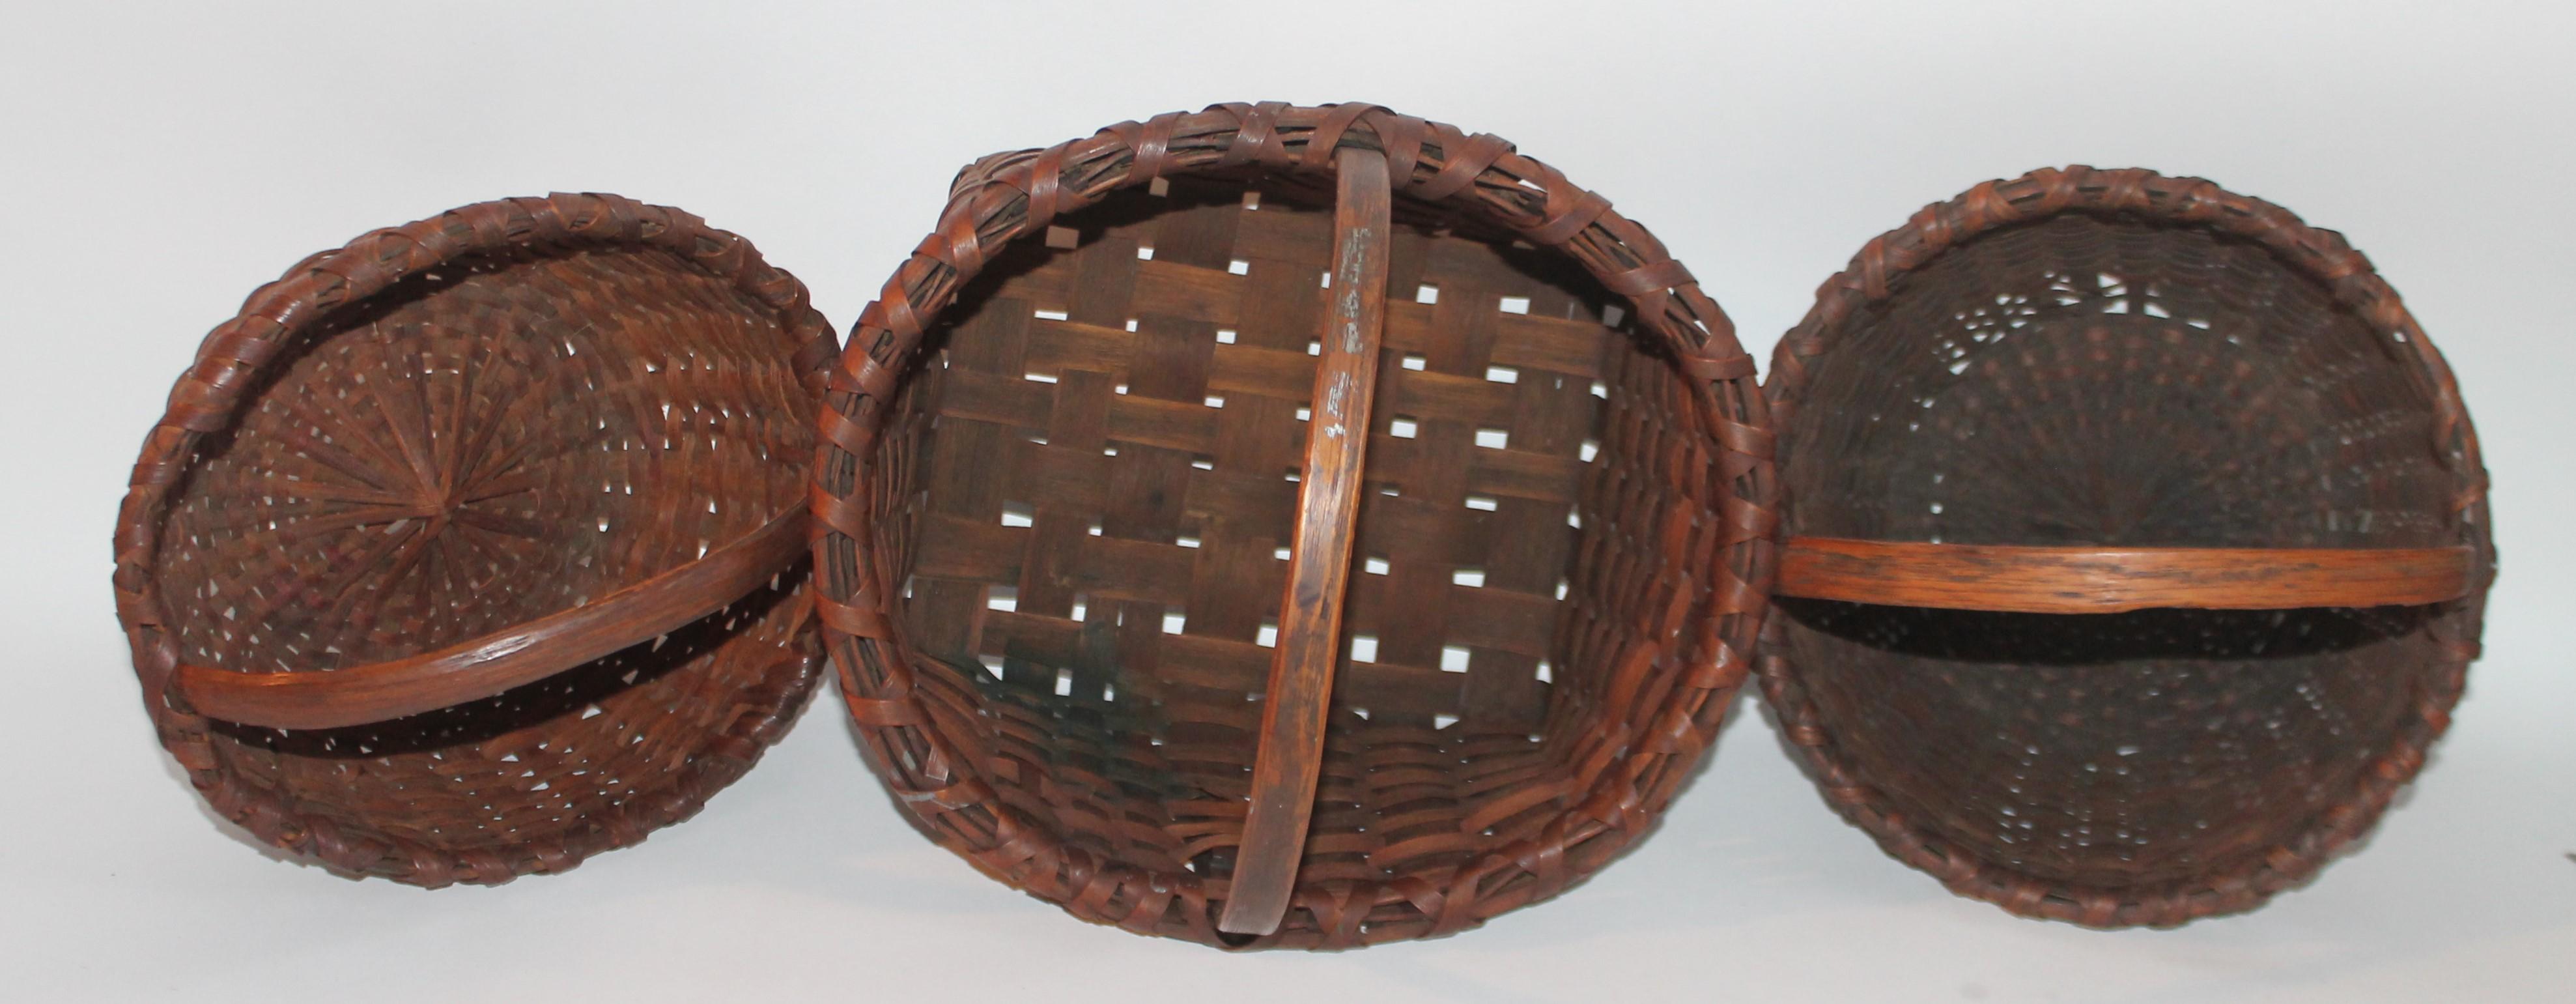 Adirondack Collection of 19th Century Baskets For Sale